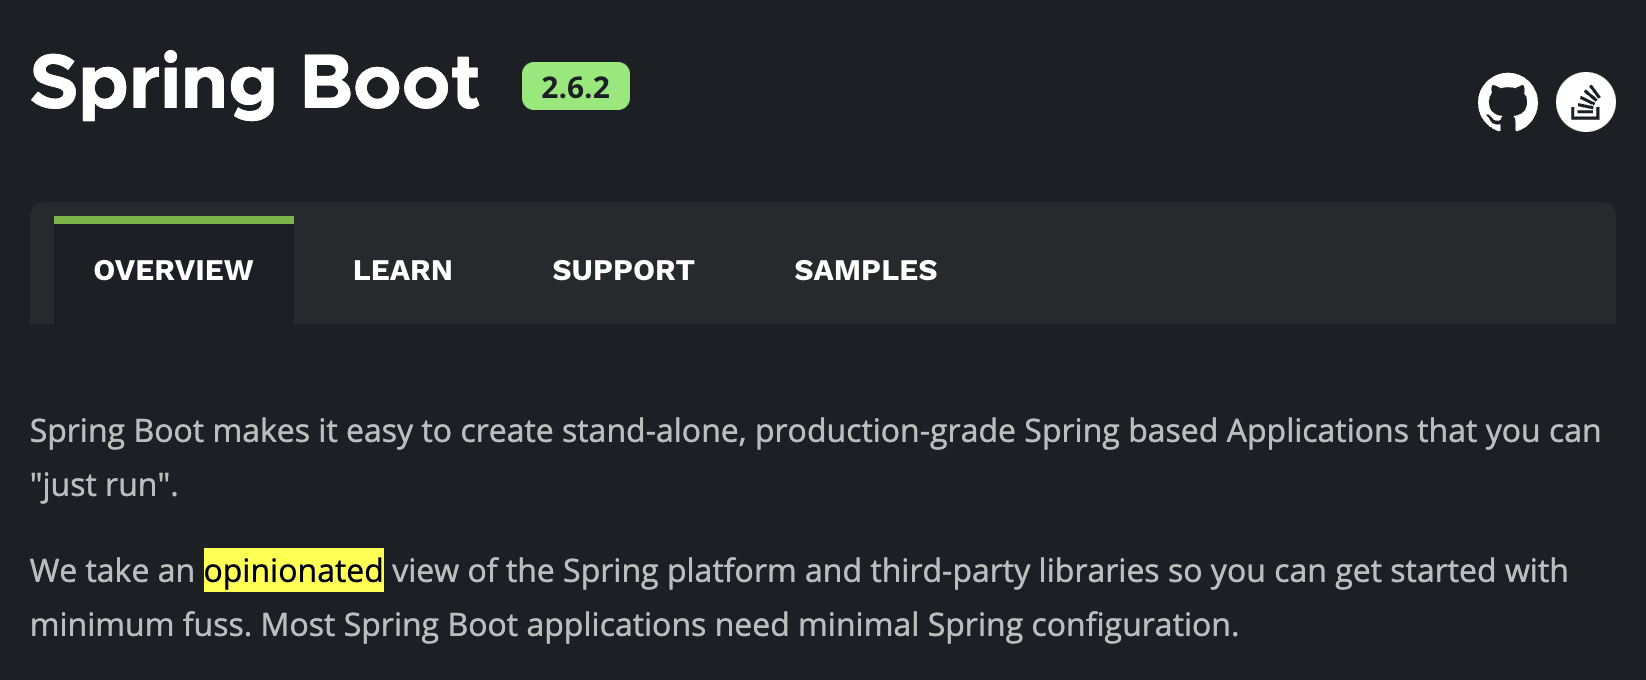 Spring Boot 是 opinionated